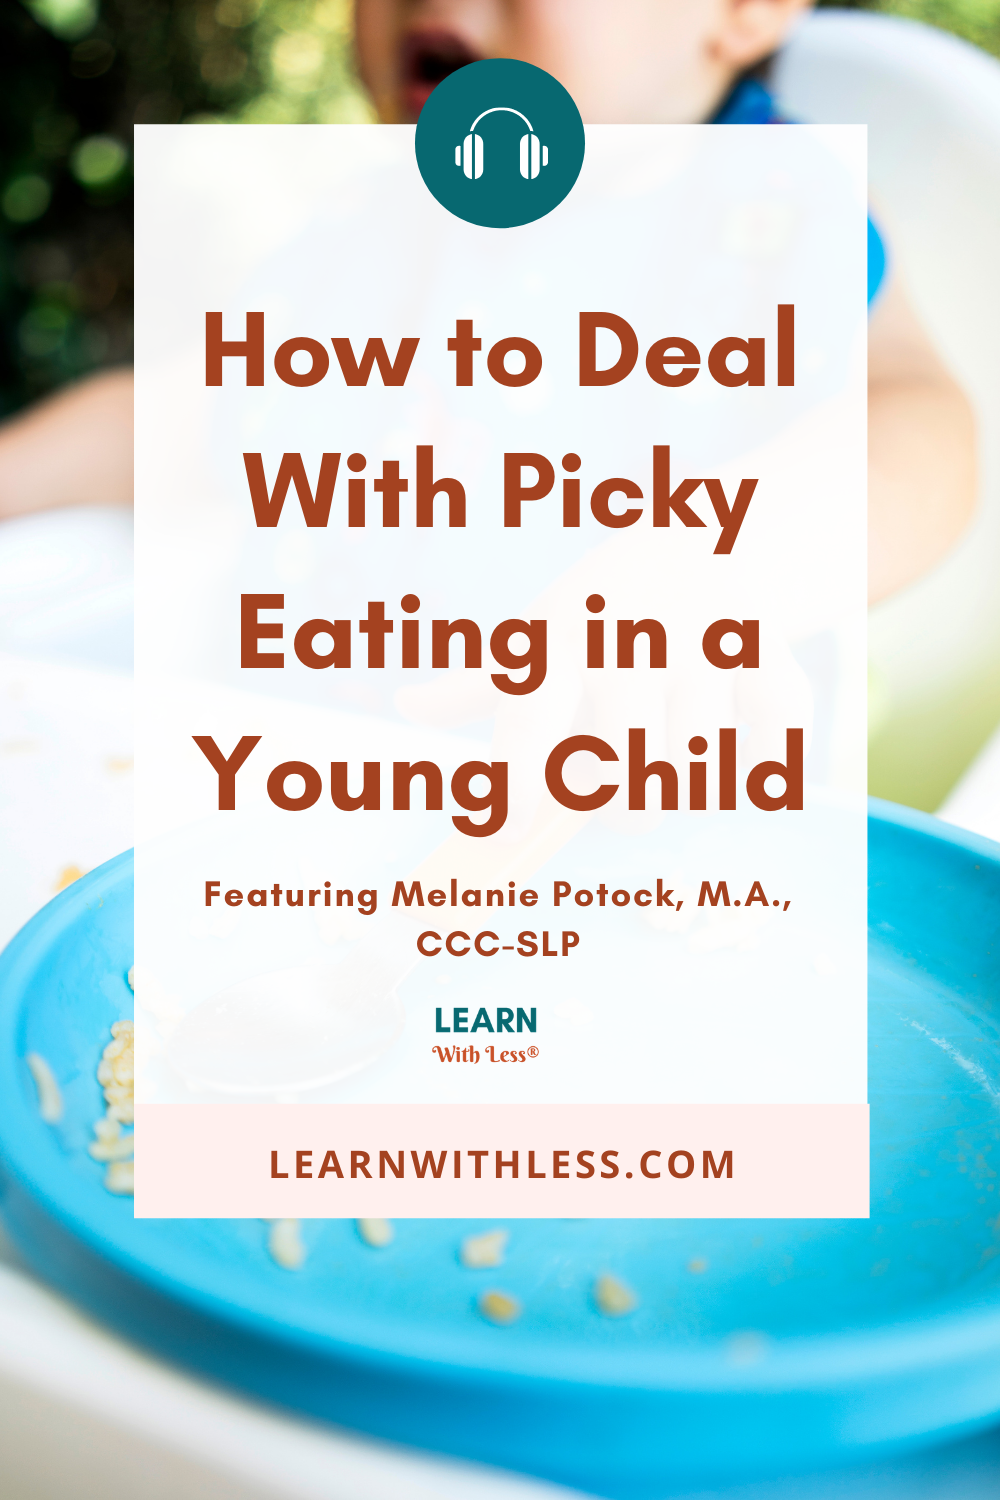 How to Deal With Picky Eating in Babies and Toddlers, with Melanie Potock